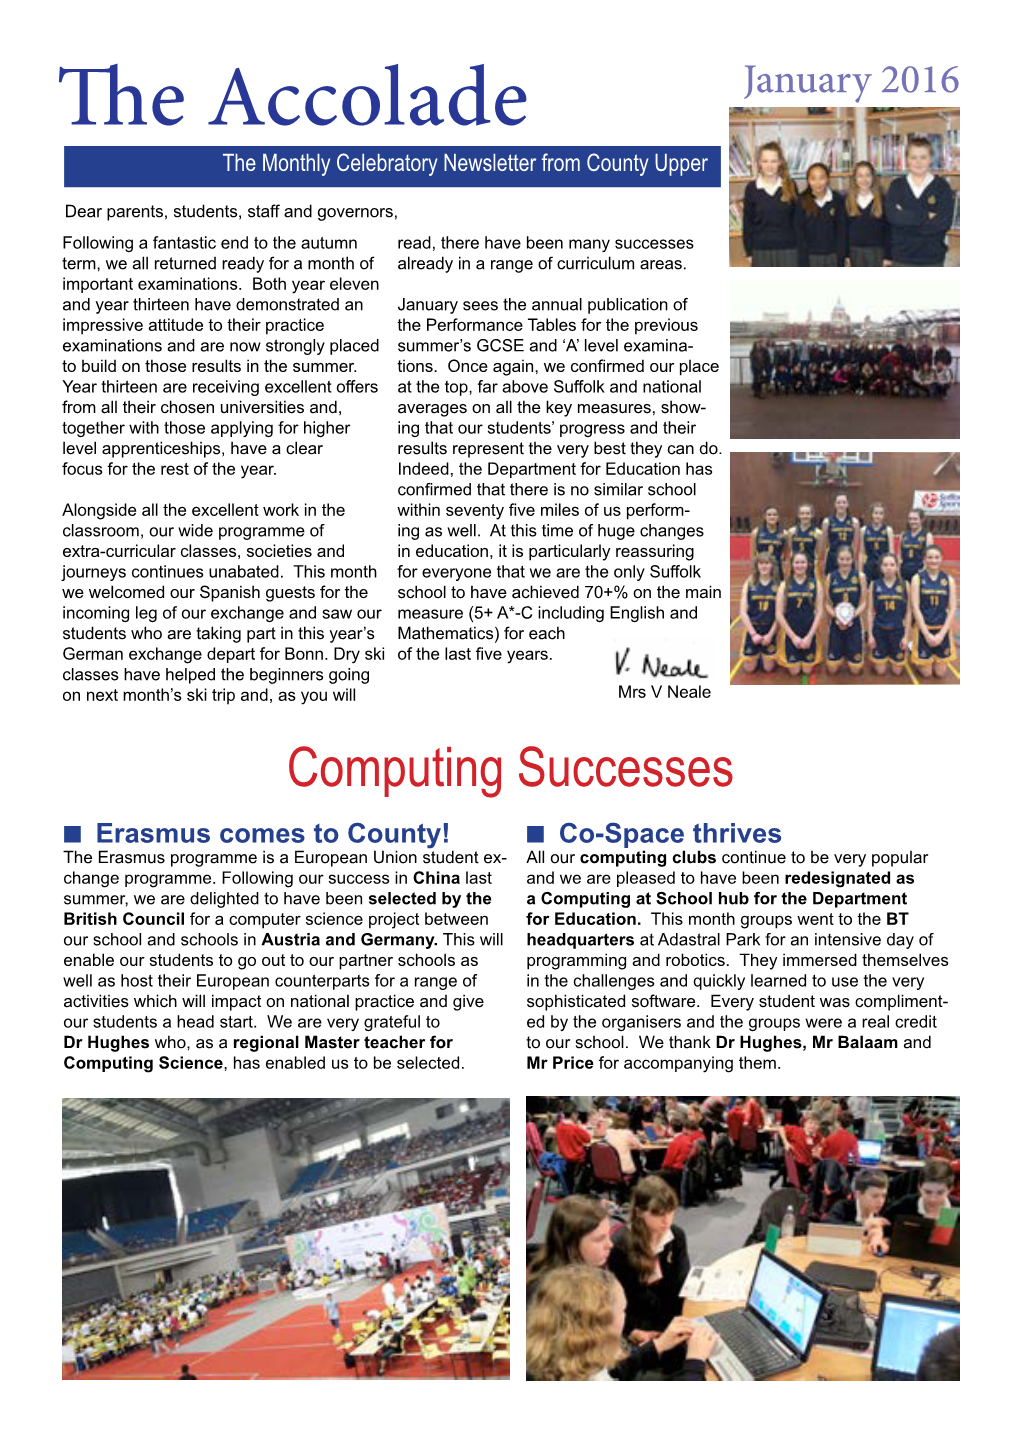 The Accolade January 2016 the Monthly Celebratory Newsletter from County Upper